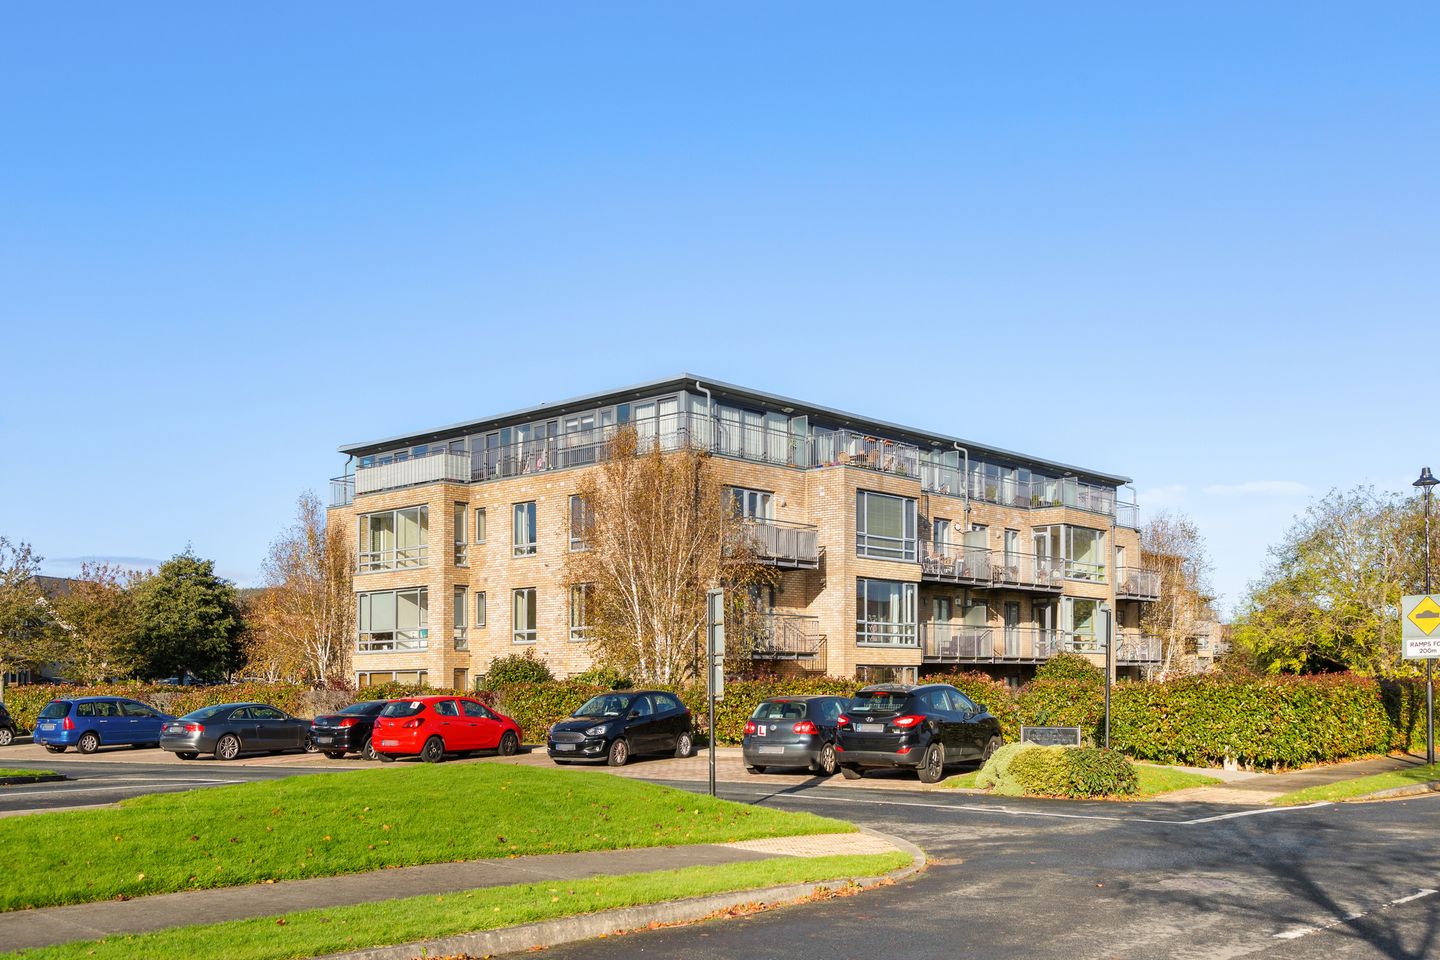 Apartment 20, Priory Court, Delgany, Co. Wicklow, A63HD53